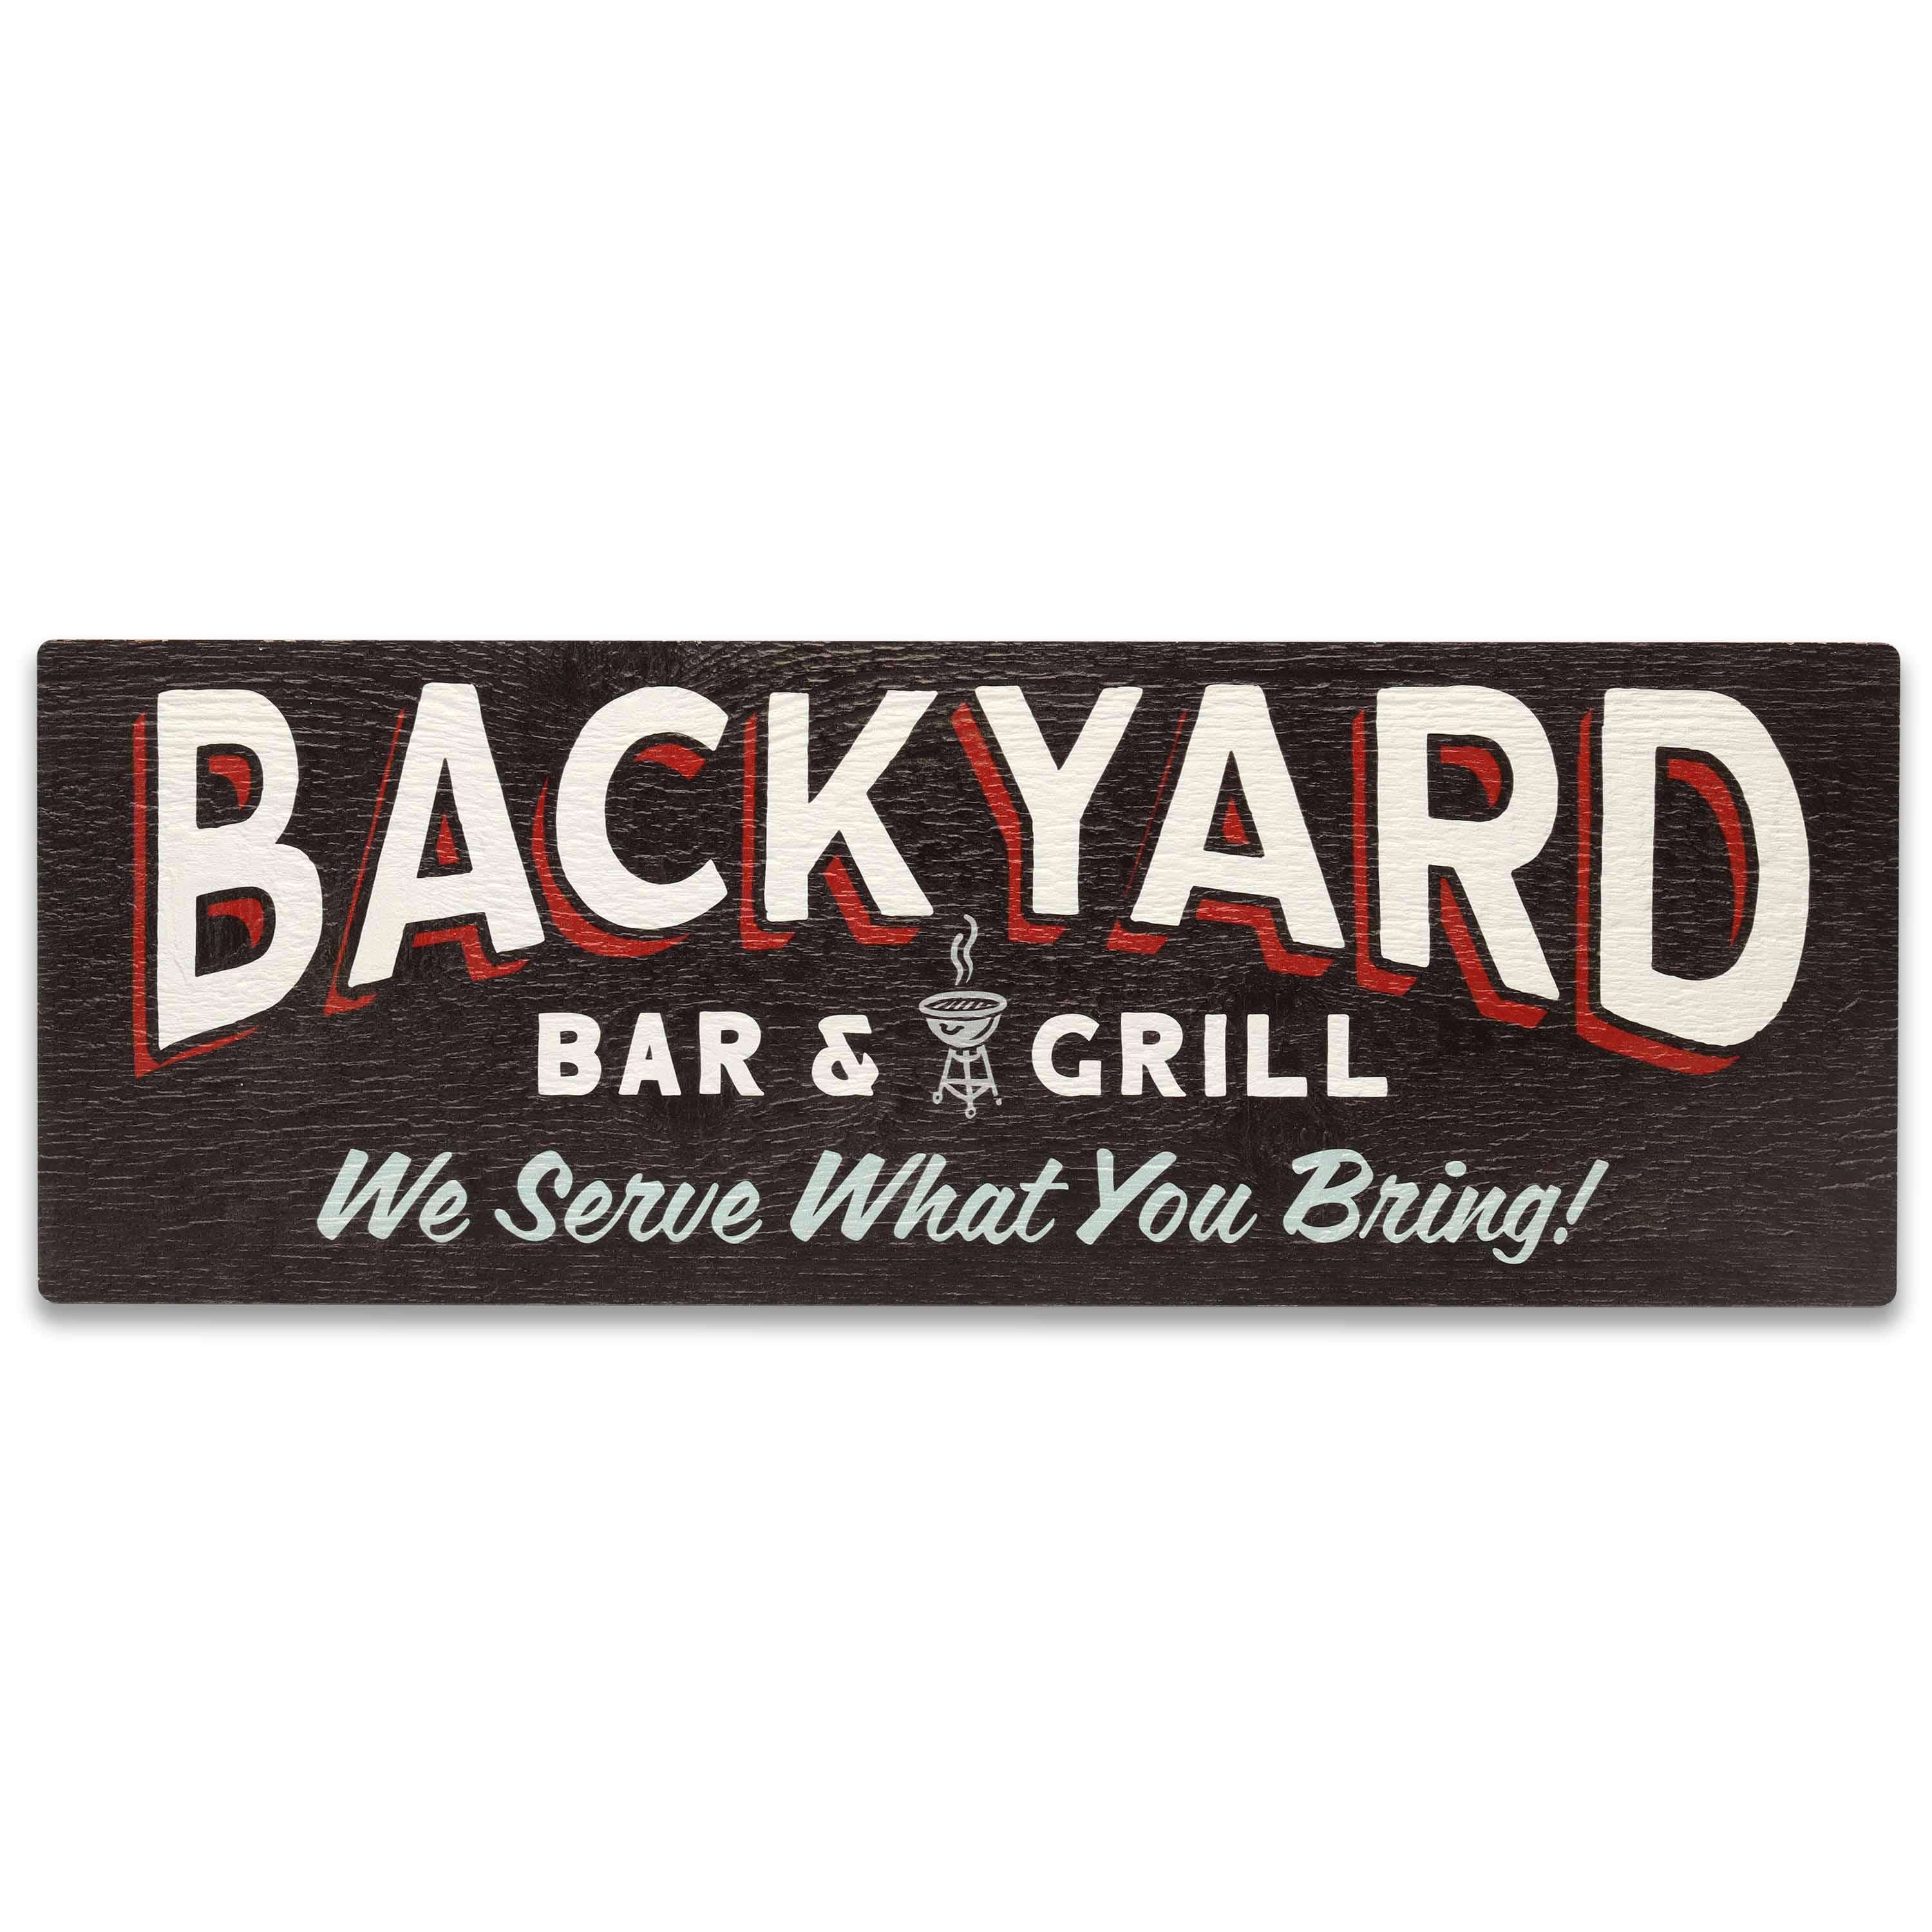 Open Road's Backyard Bar and Grill Wood Sign